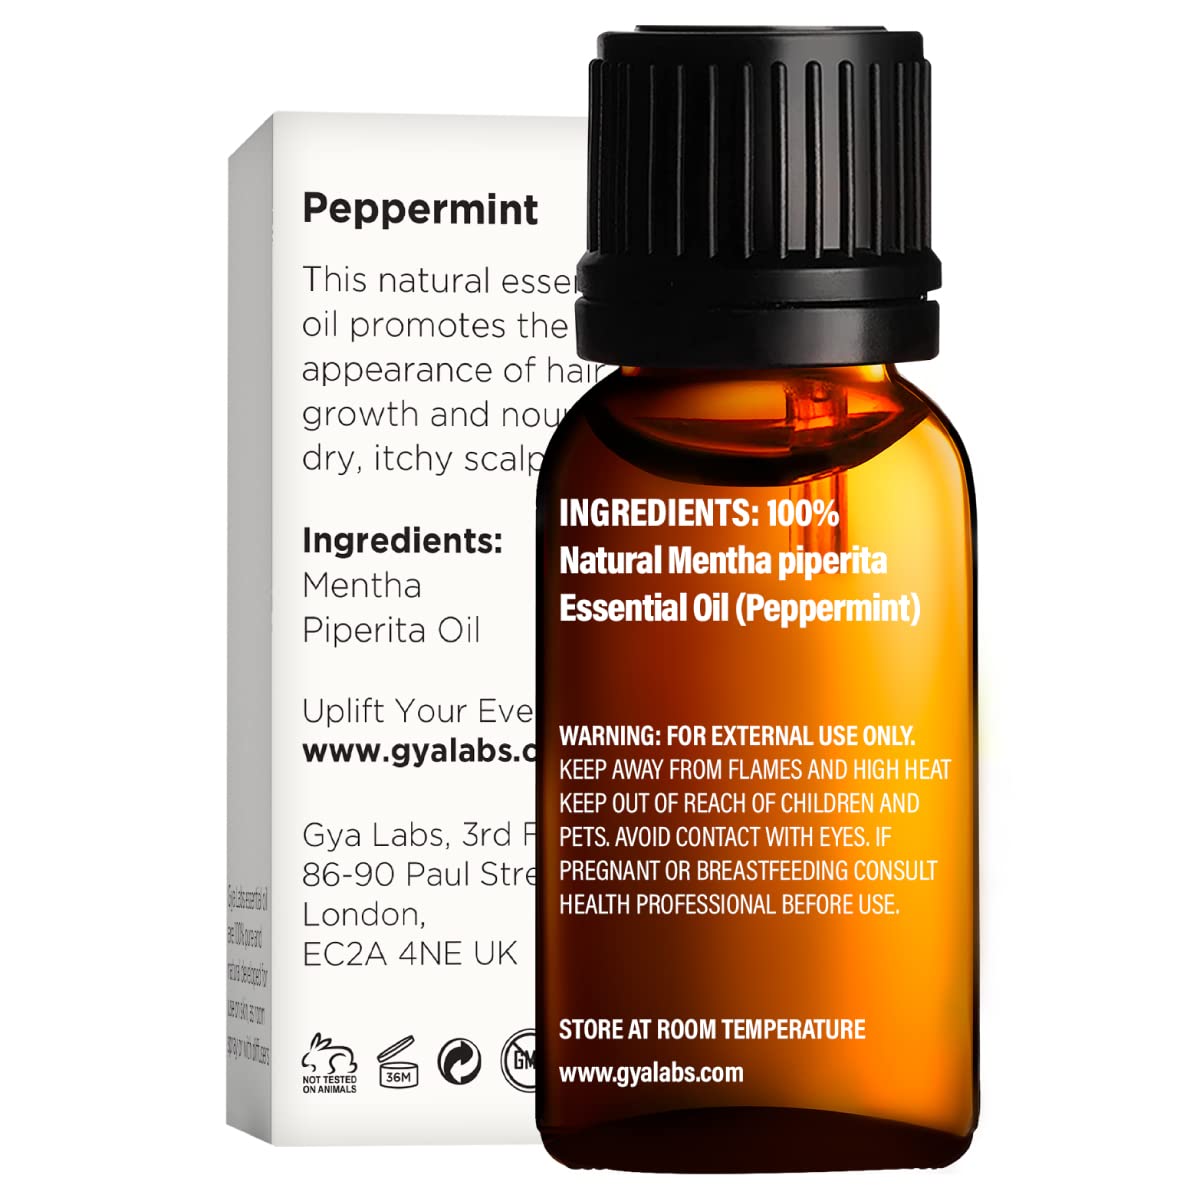 Rosemary Oil & Peppermint Oil for Hair Growth Set - 100% Pure Therapeutic Grade Essential Oils Set - 2x10 ml - Gya Labs